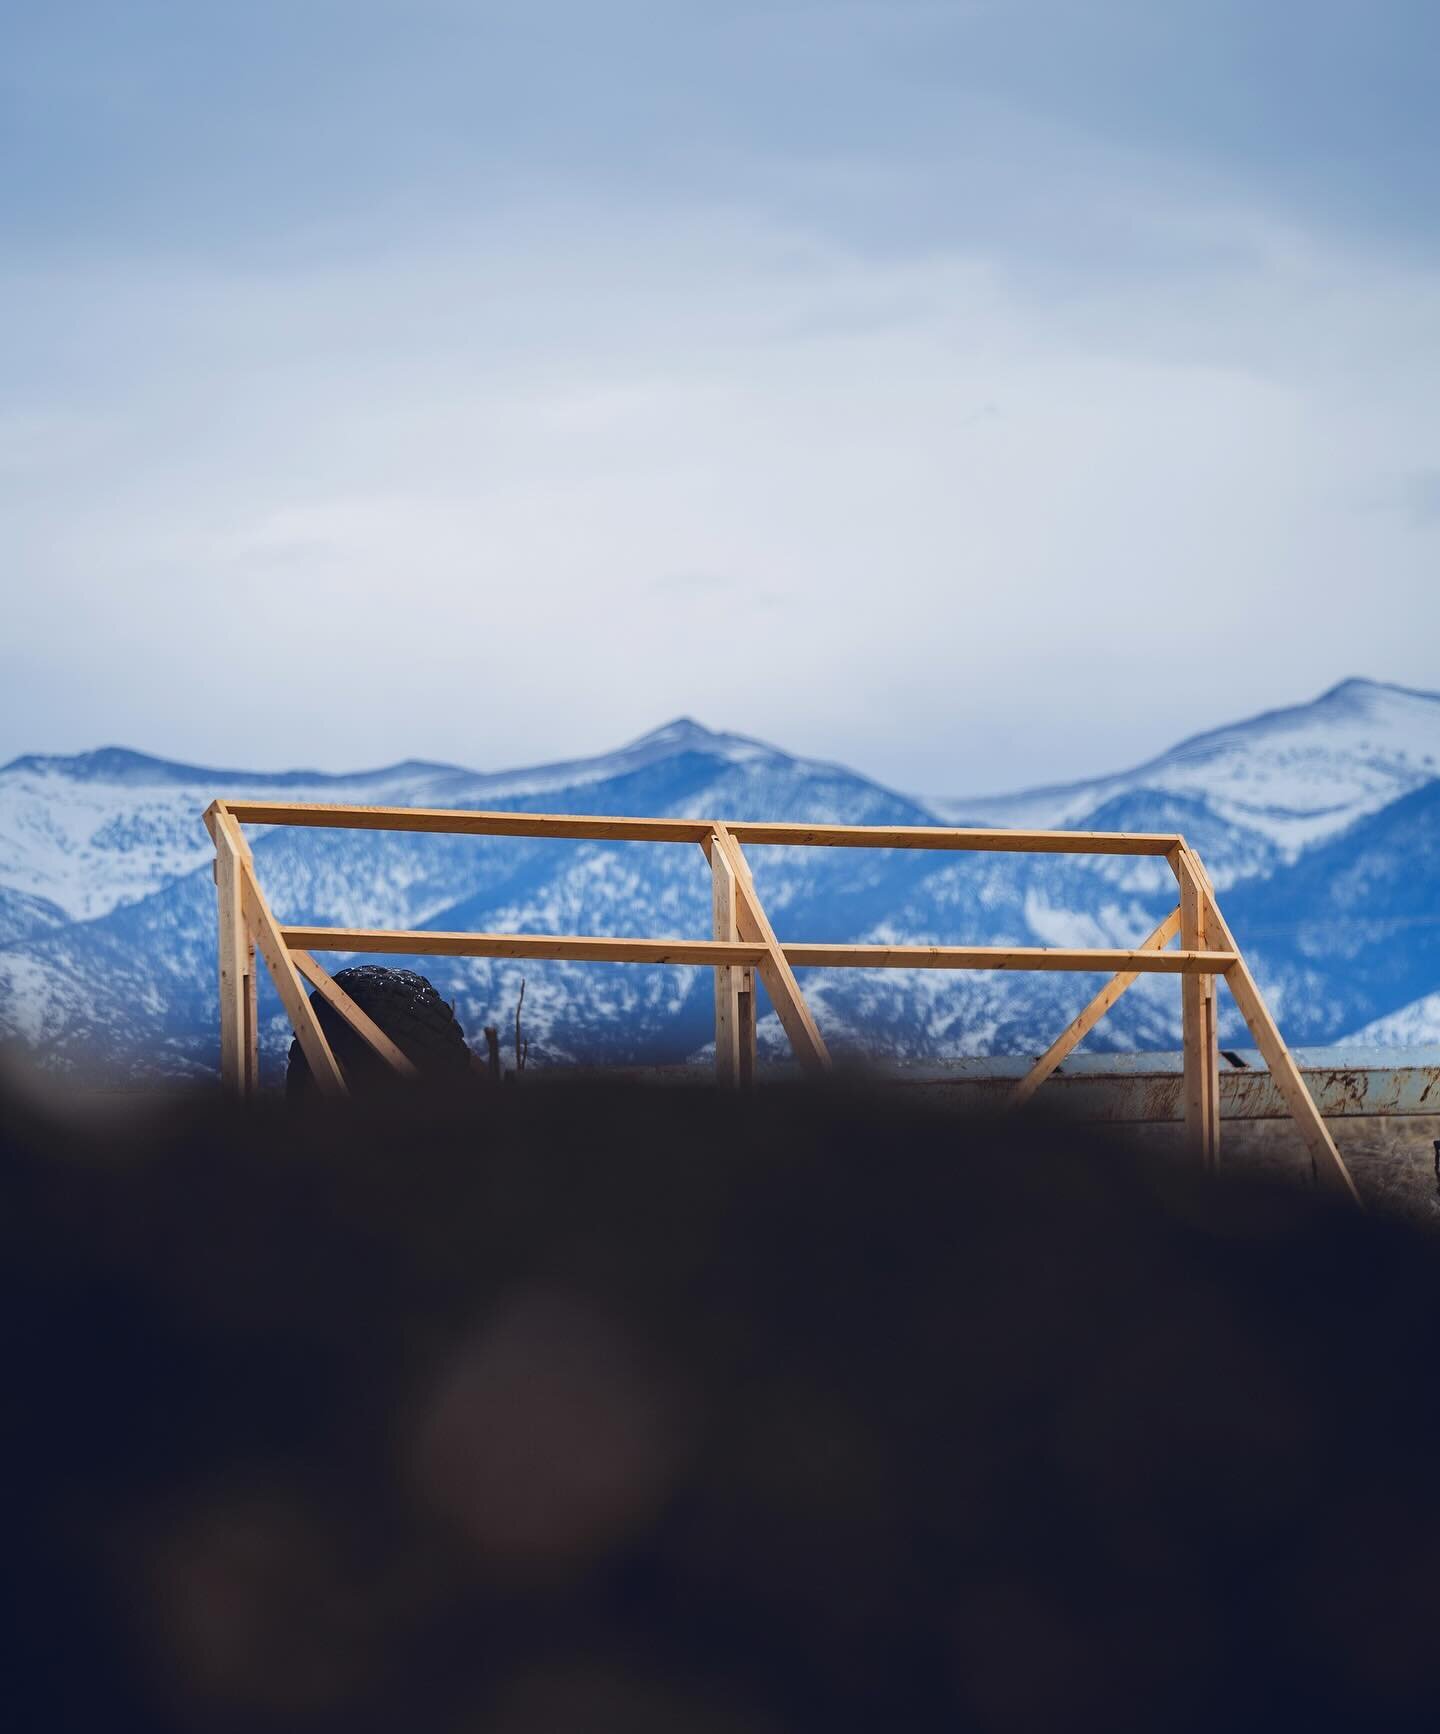 Yet another sneak peak of our upcoming project at the yard. One hint is &ldquo;sustainability&rdquo; ☀️ and our view of the Bridgers reminds us daily of our positive impact to protect the place we live and love.

#yescompost #composting #sustainabili